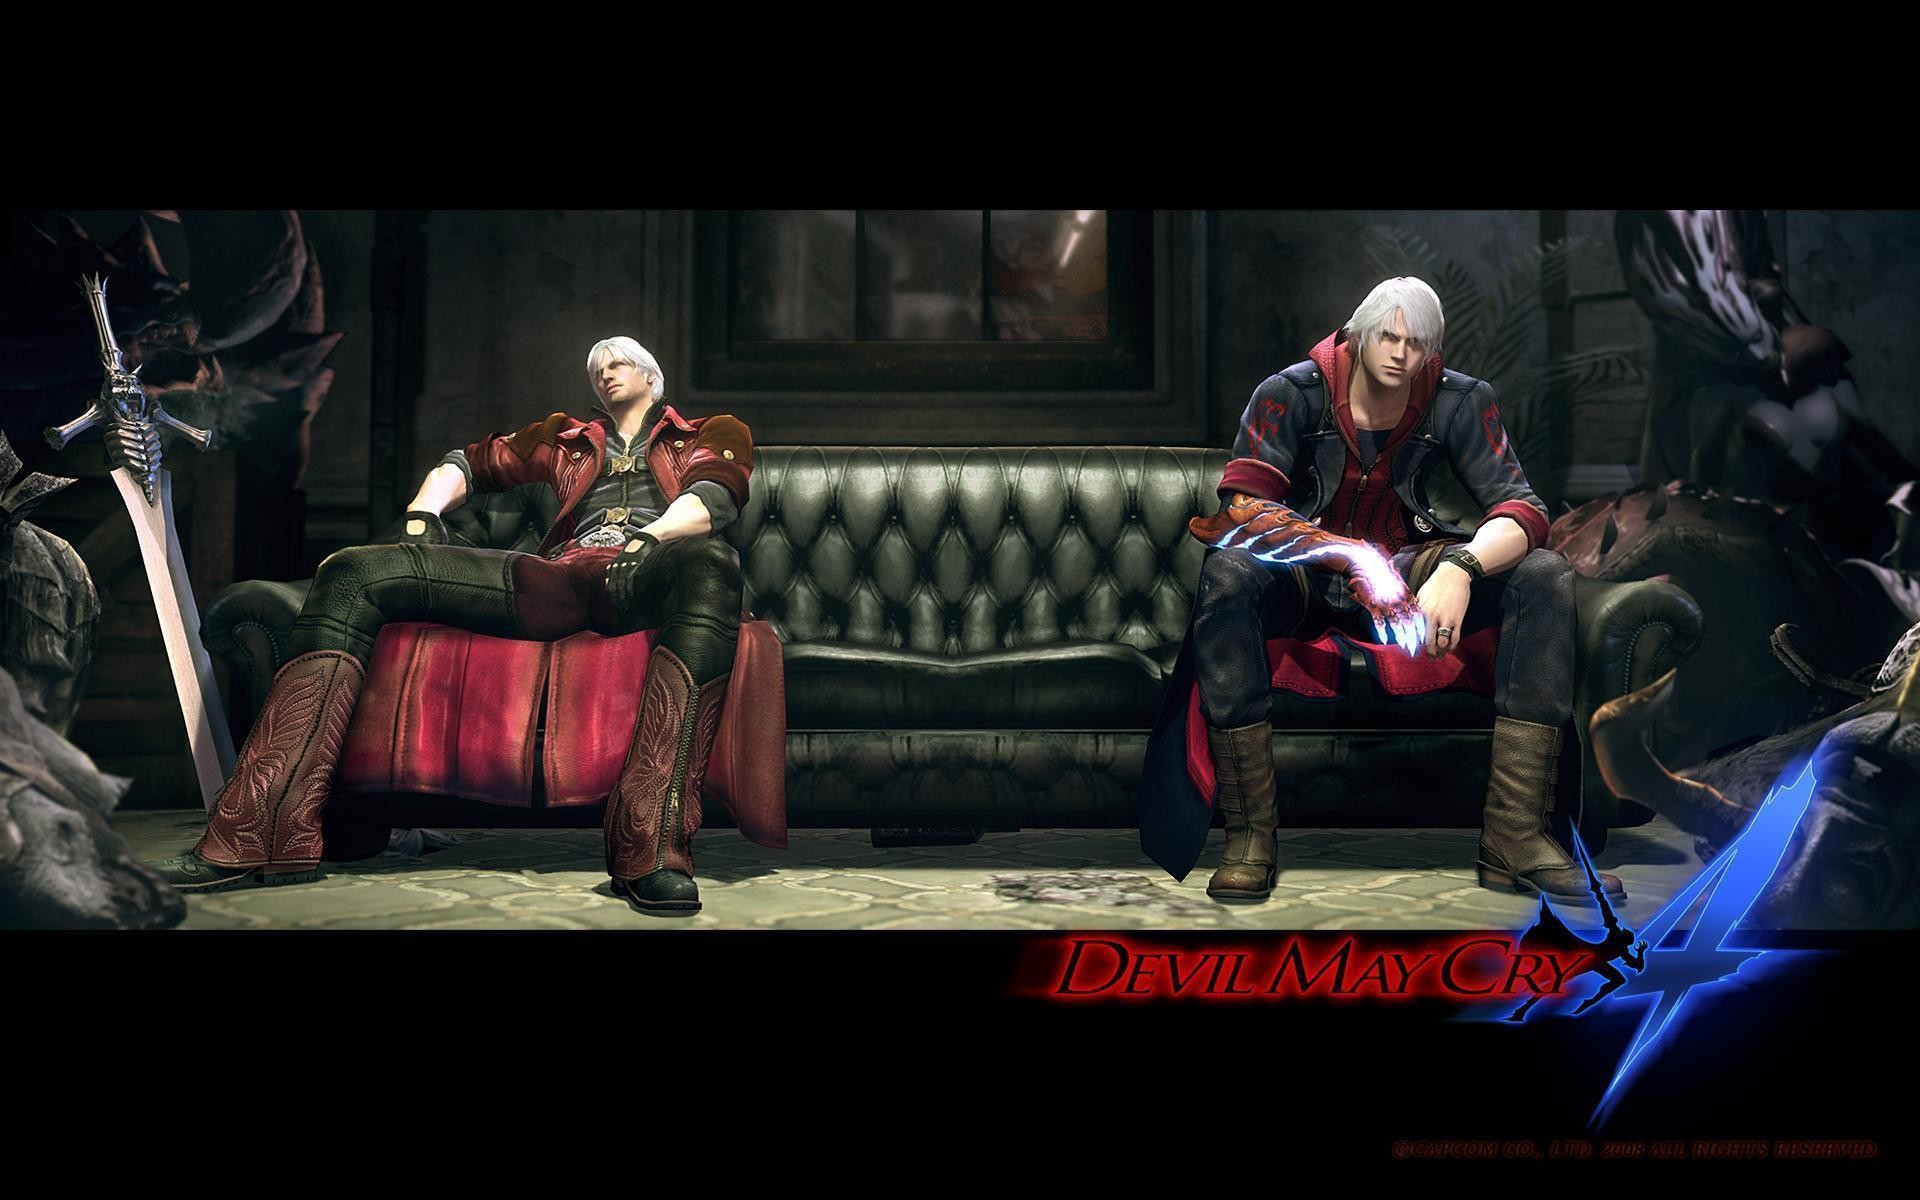 1920x1200 Devil May Cry 4 Wallpapers - Full HD wallpaper search